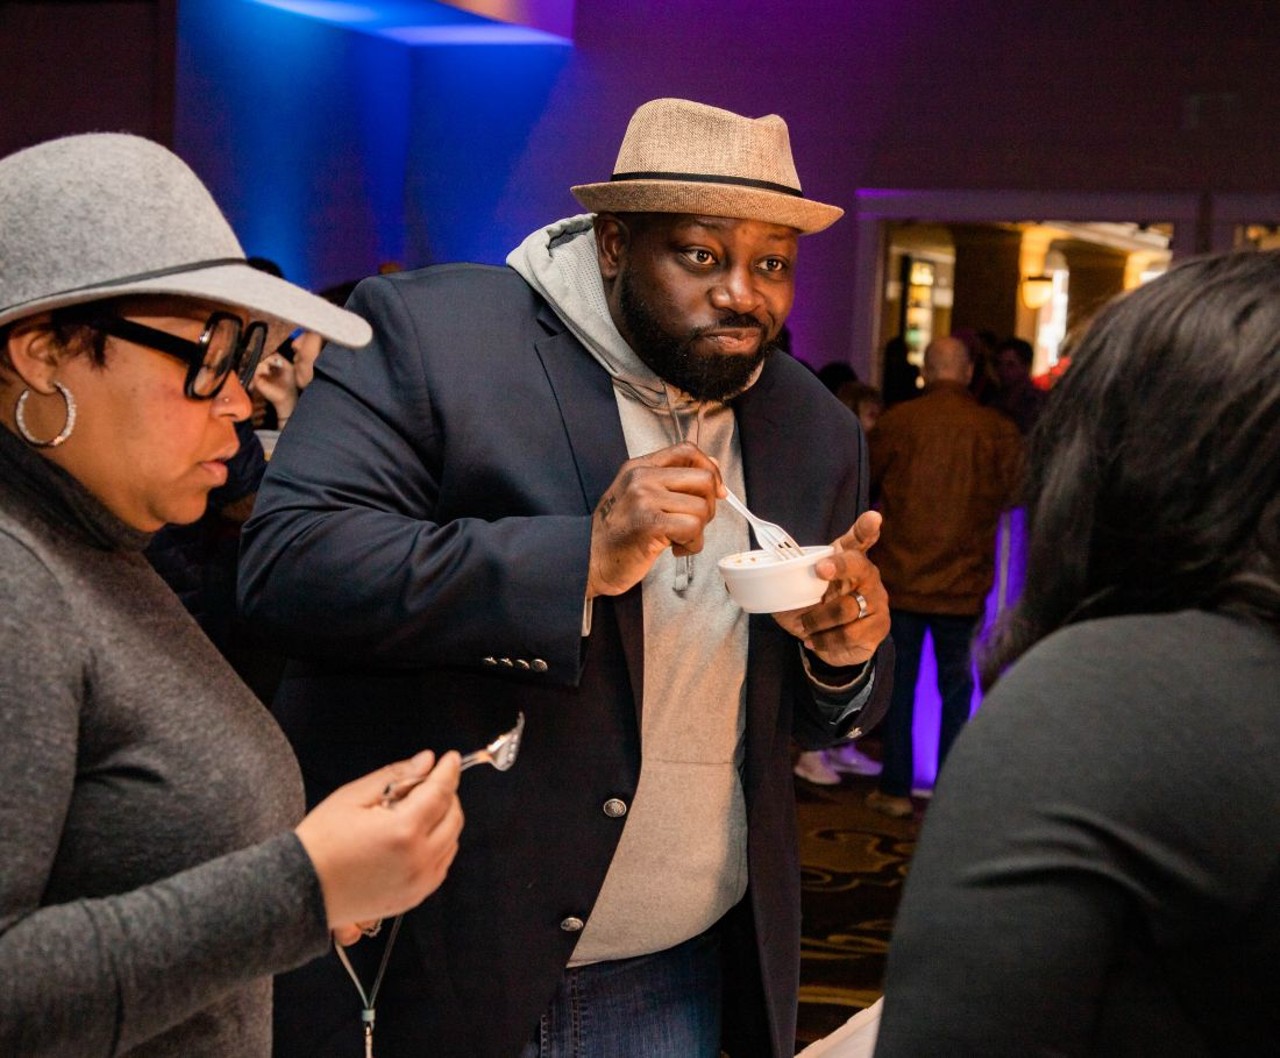 More Photos of All the Fun at United We Brunch 2019